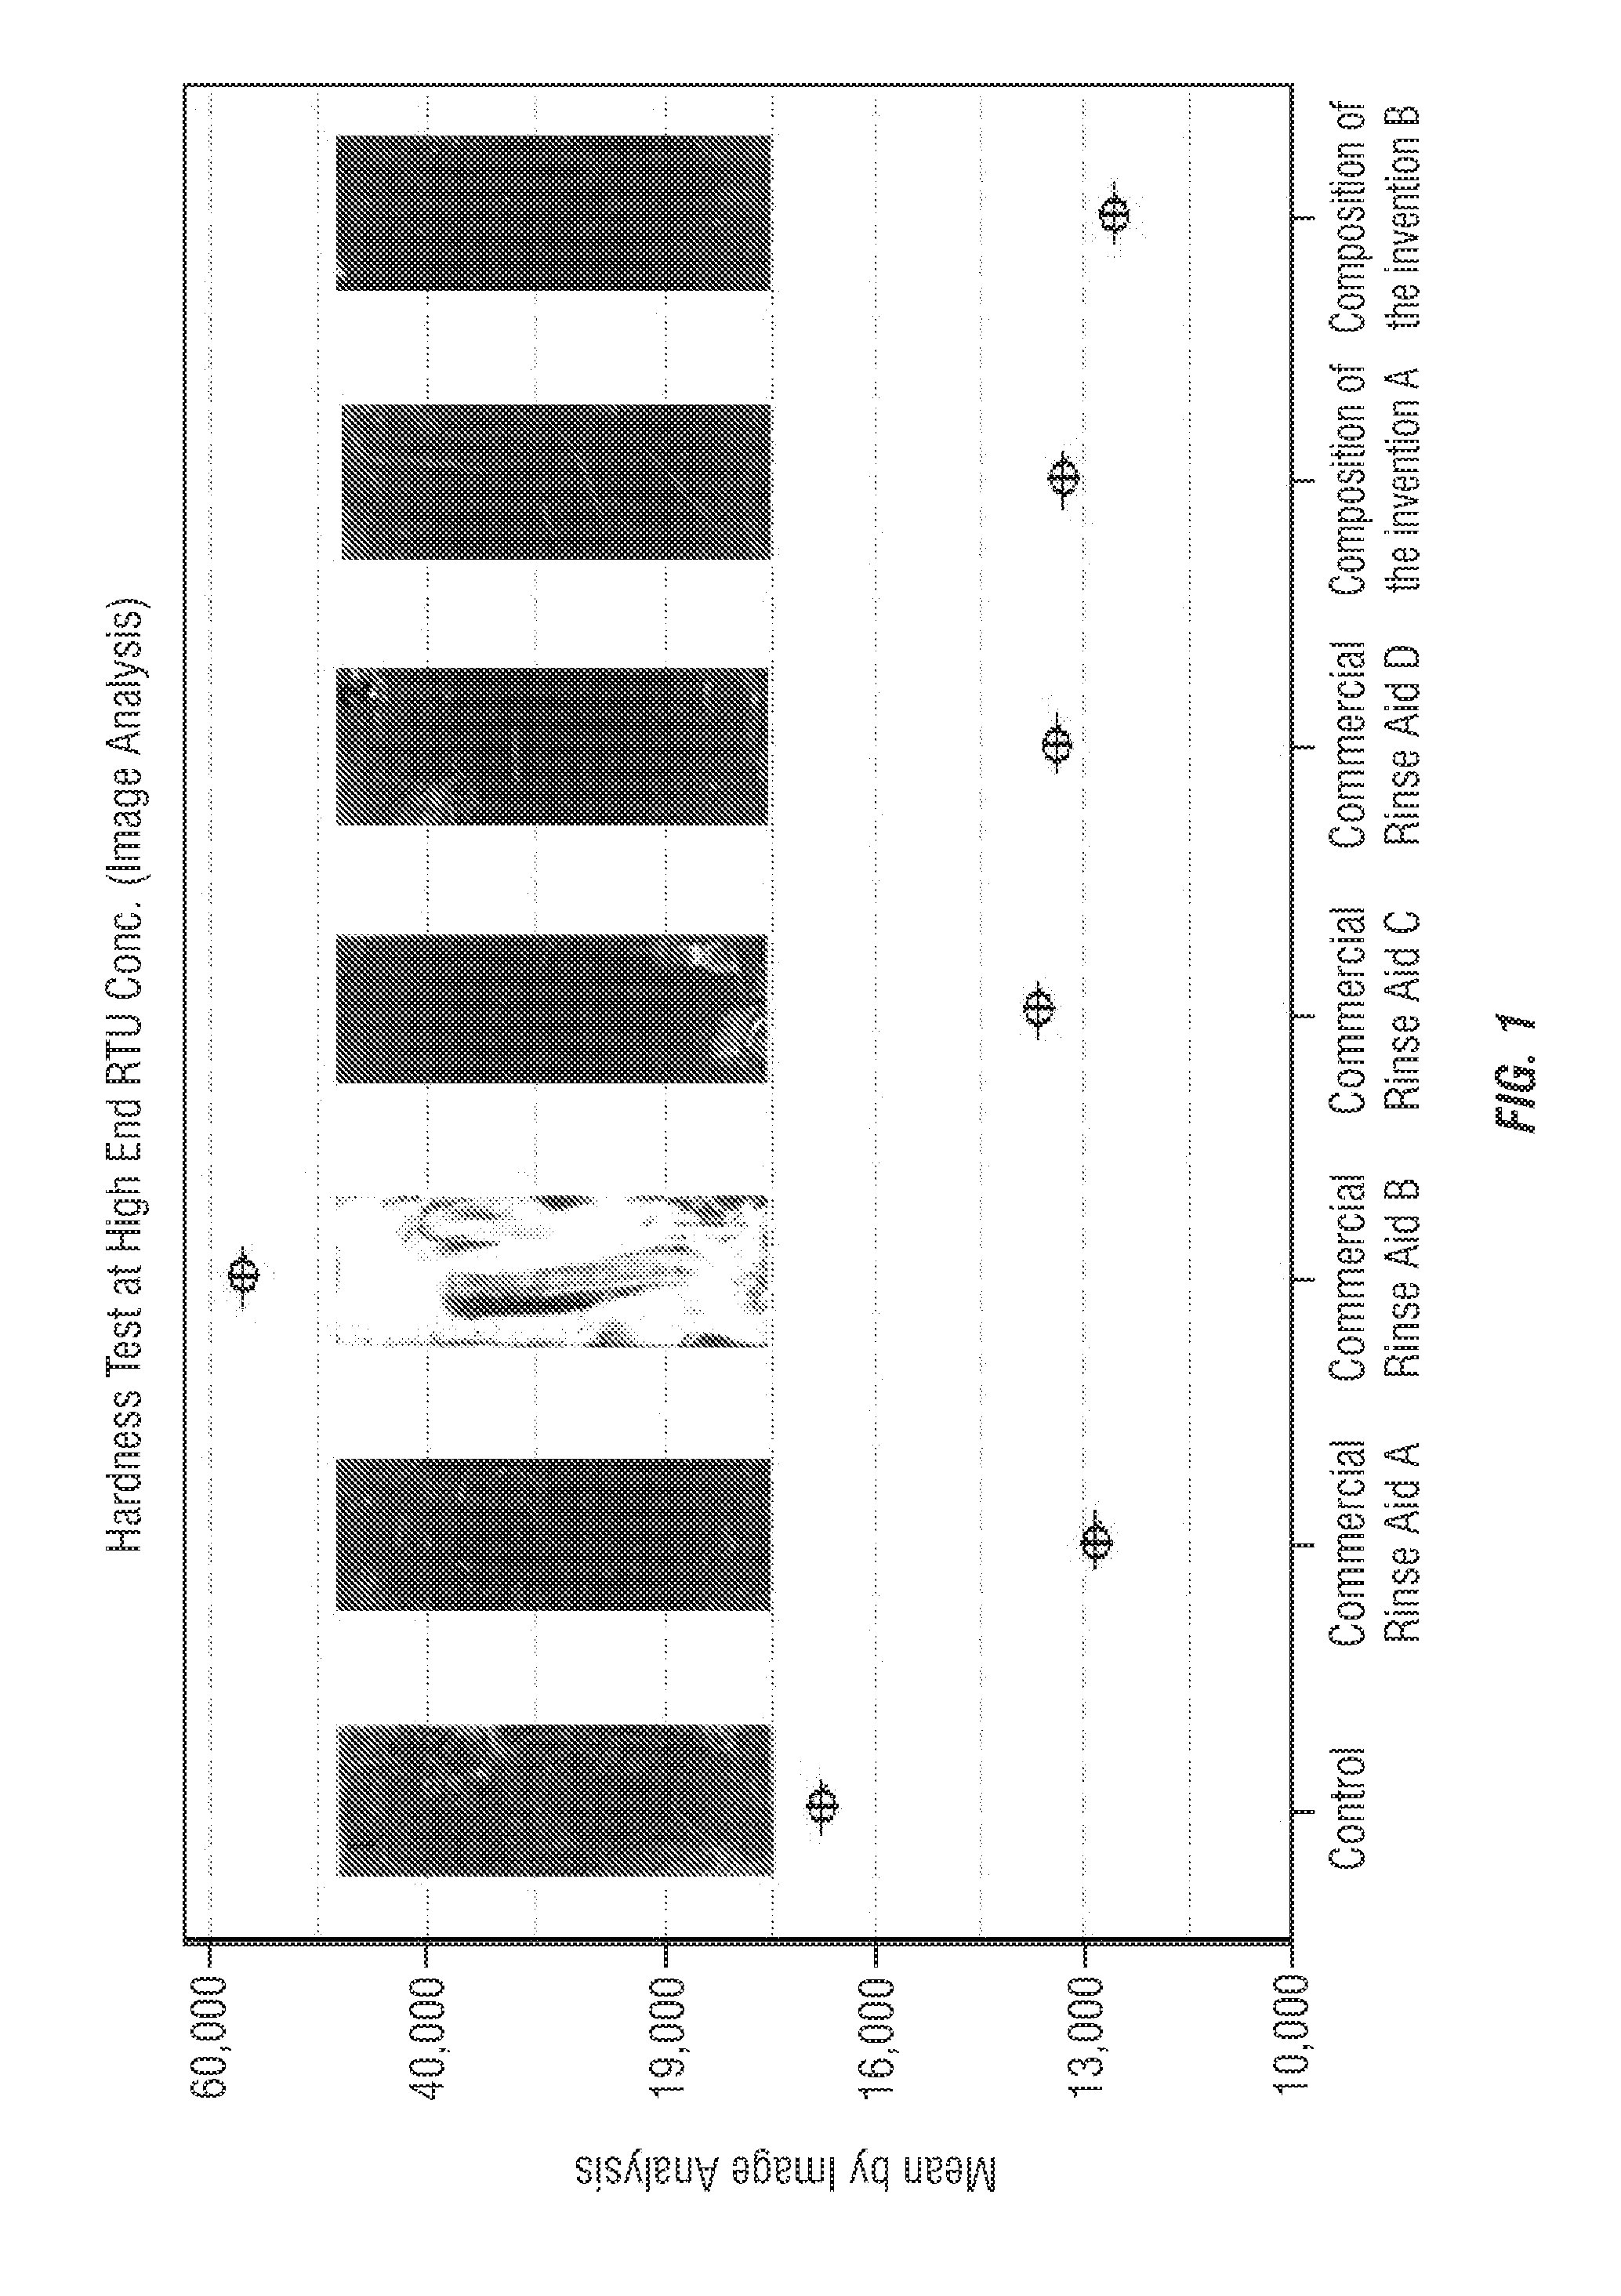 Solid rinse aid composition and method of making same